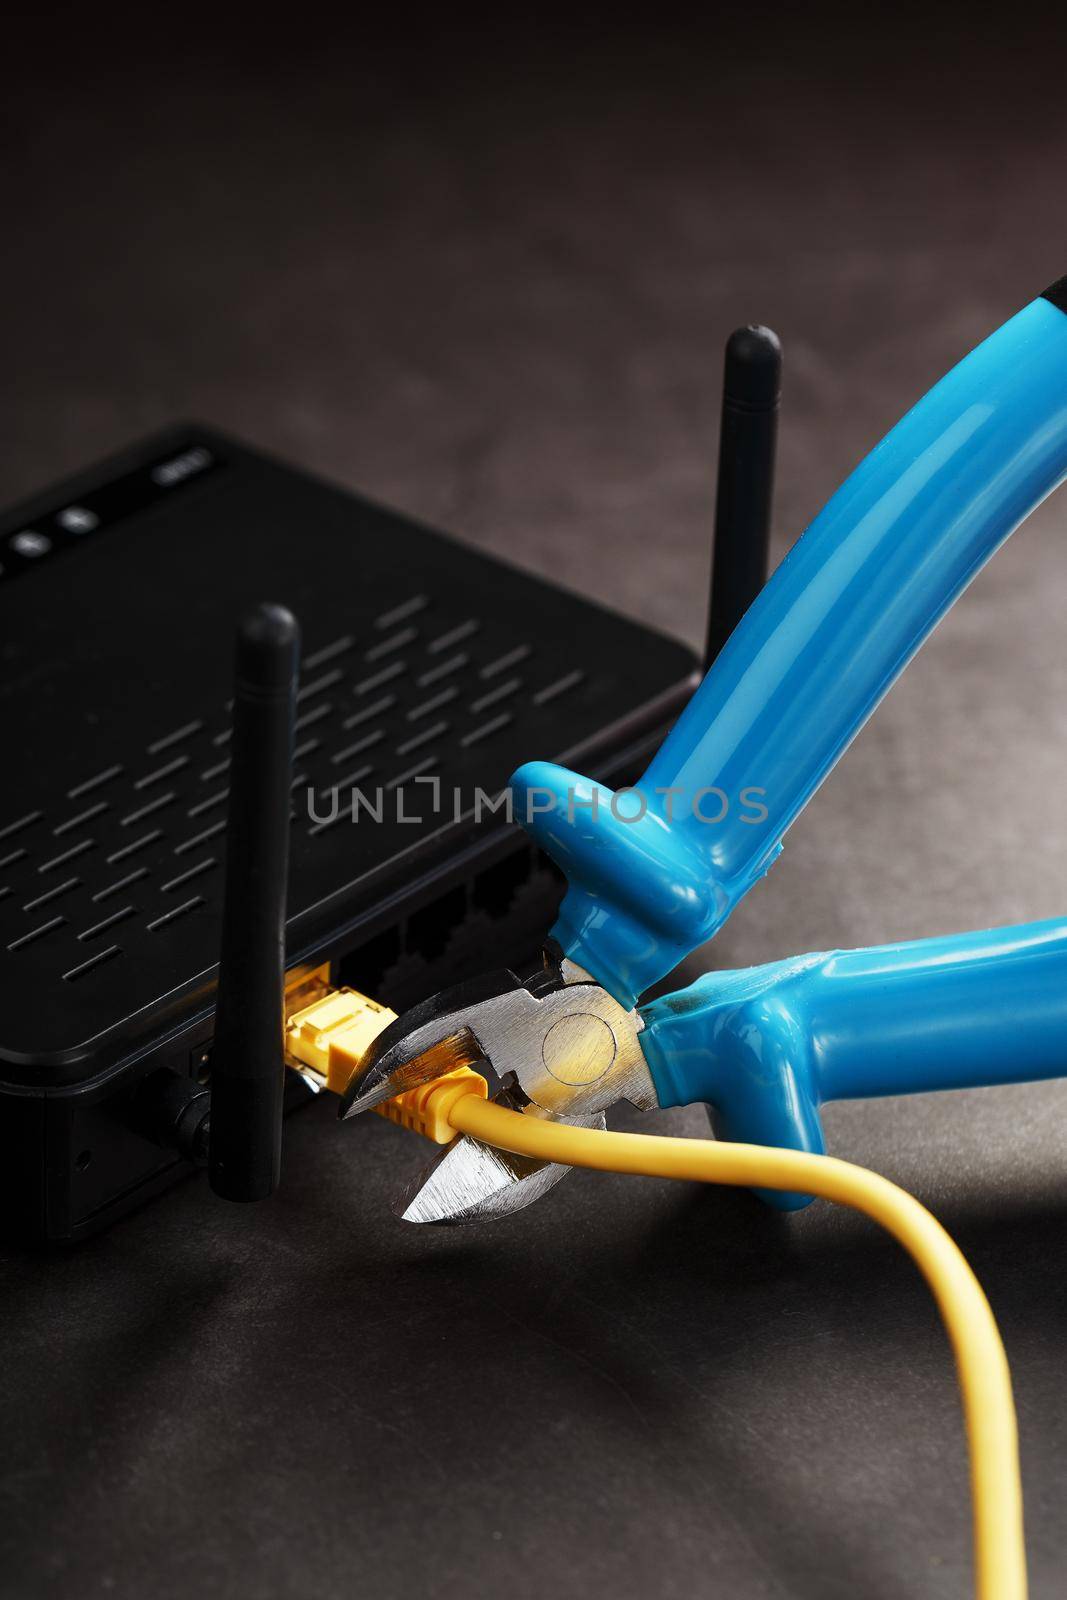 Cutting and disconnecting the network Internet connection with cutting pliers. by AlexGrec